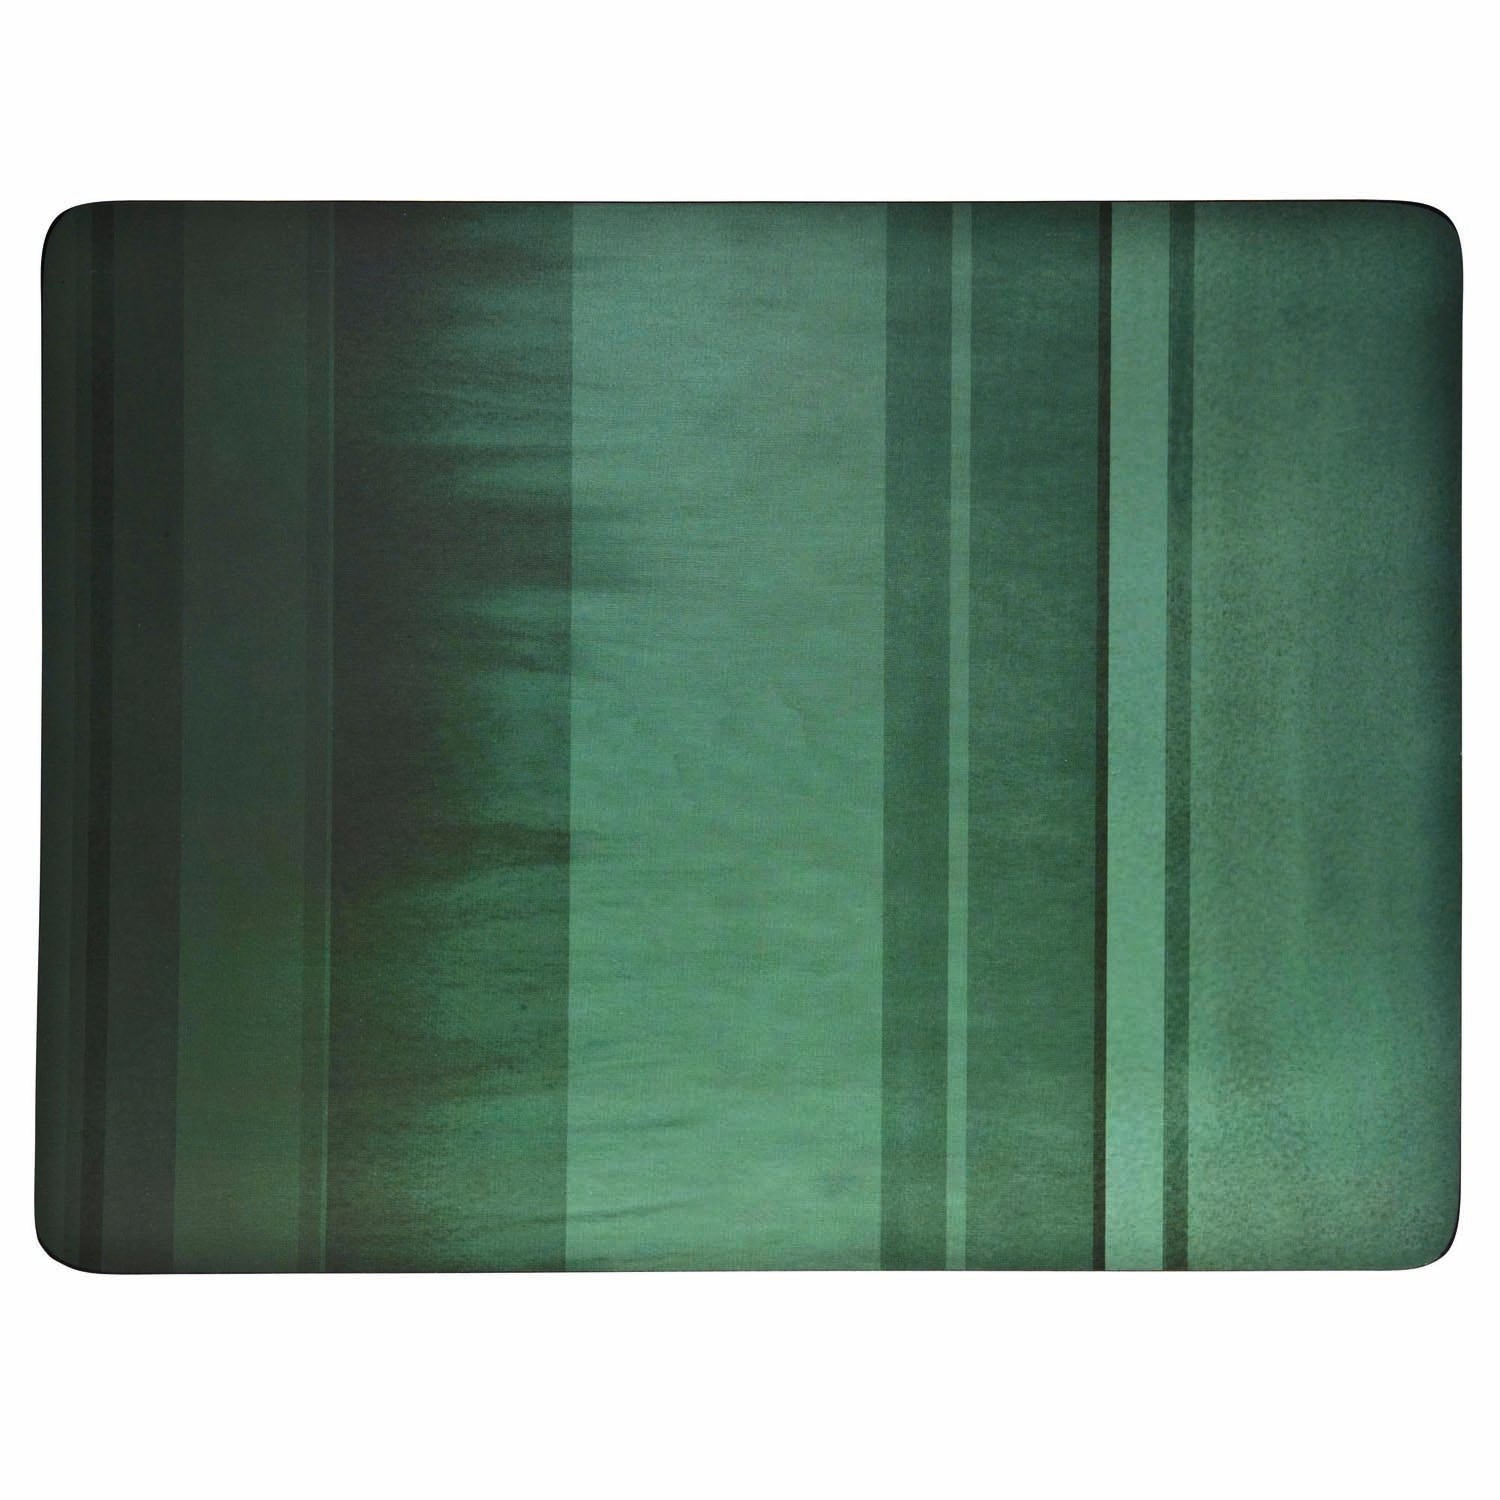 Denby Placemats - Green - Set of 6 1 Shaws Department Stores